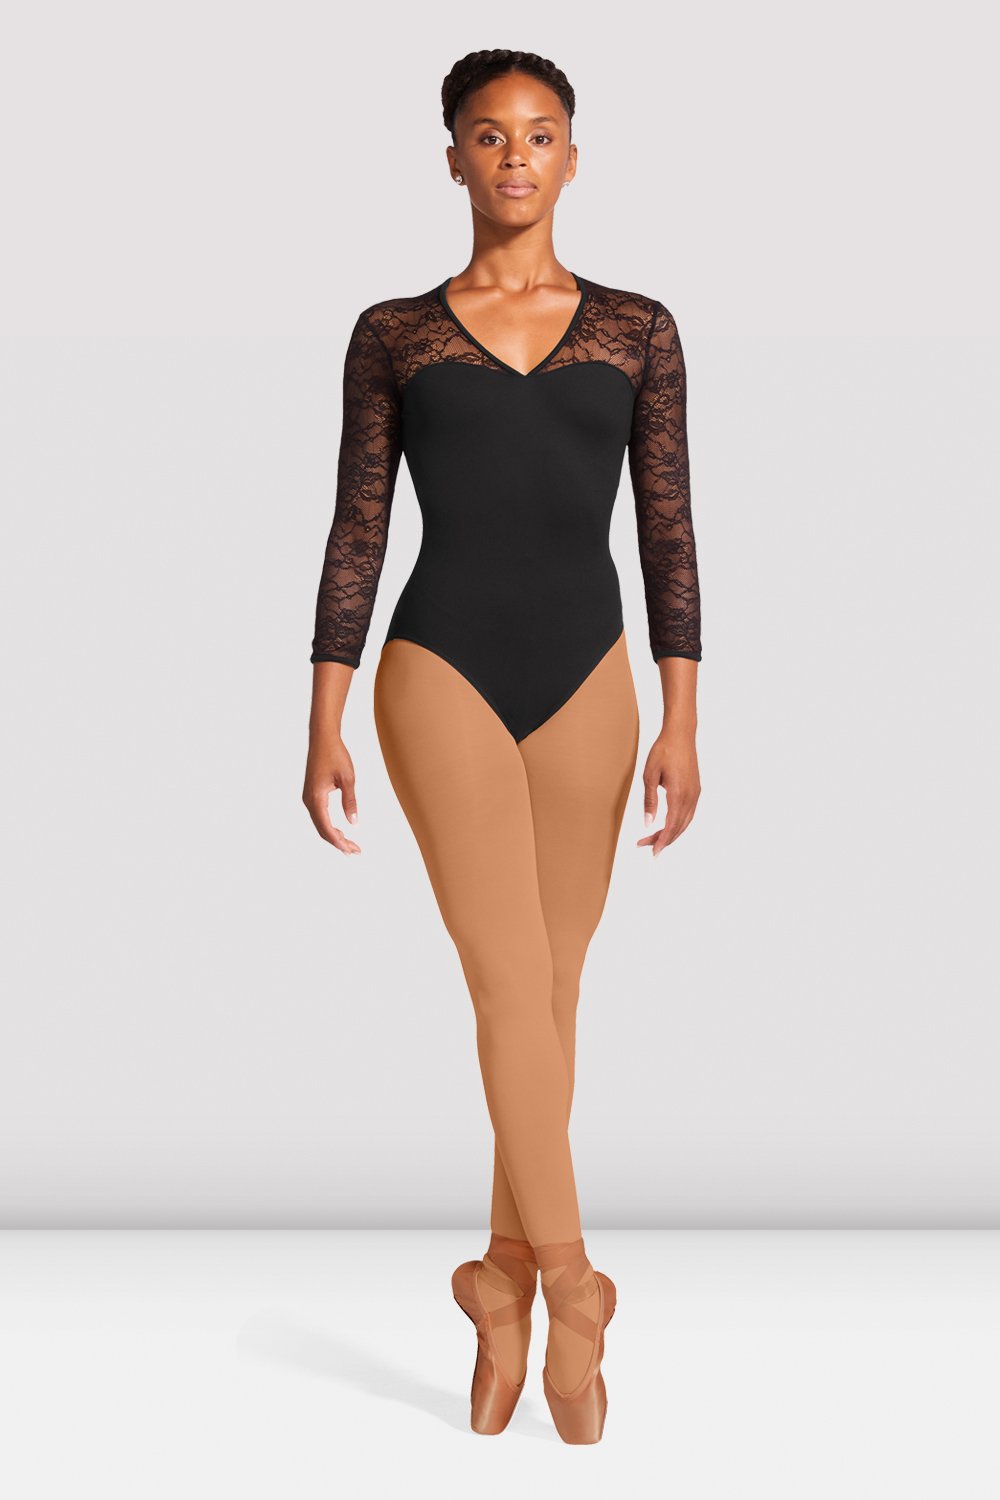 L6016 LACE 3/4 SLEEVE LEOTARD - Cain of Heswall